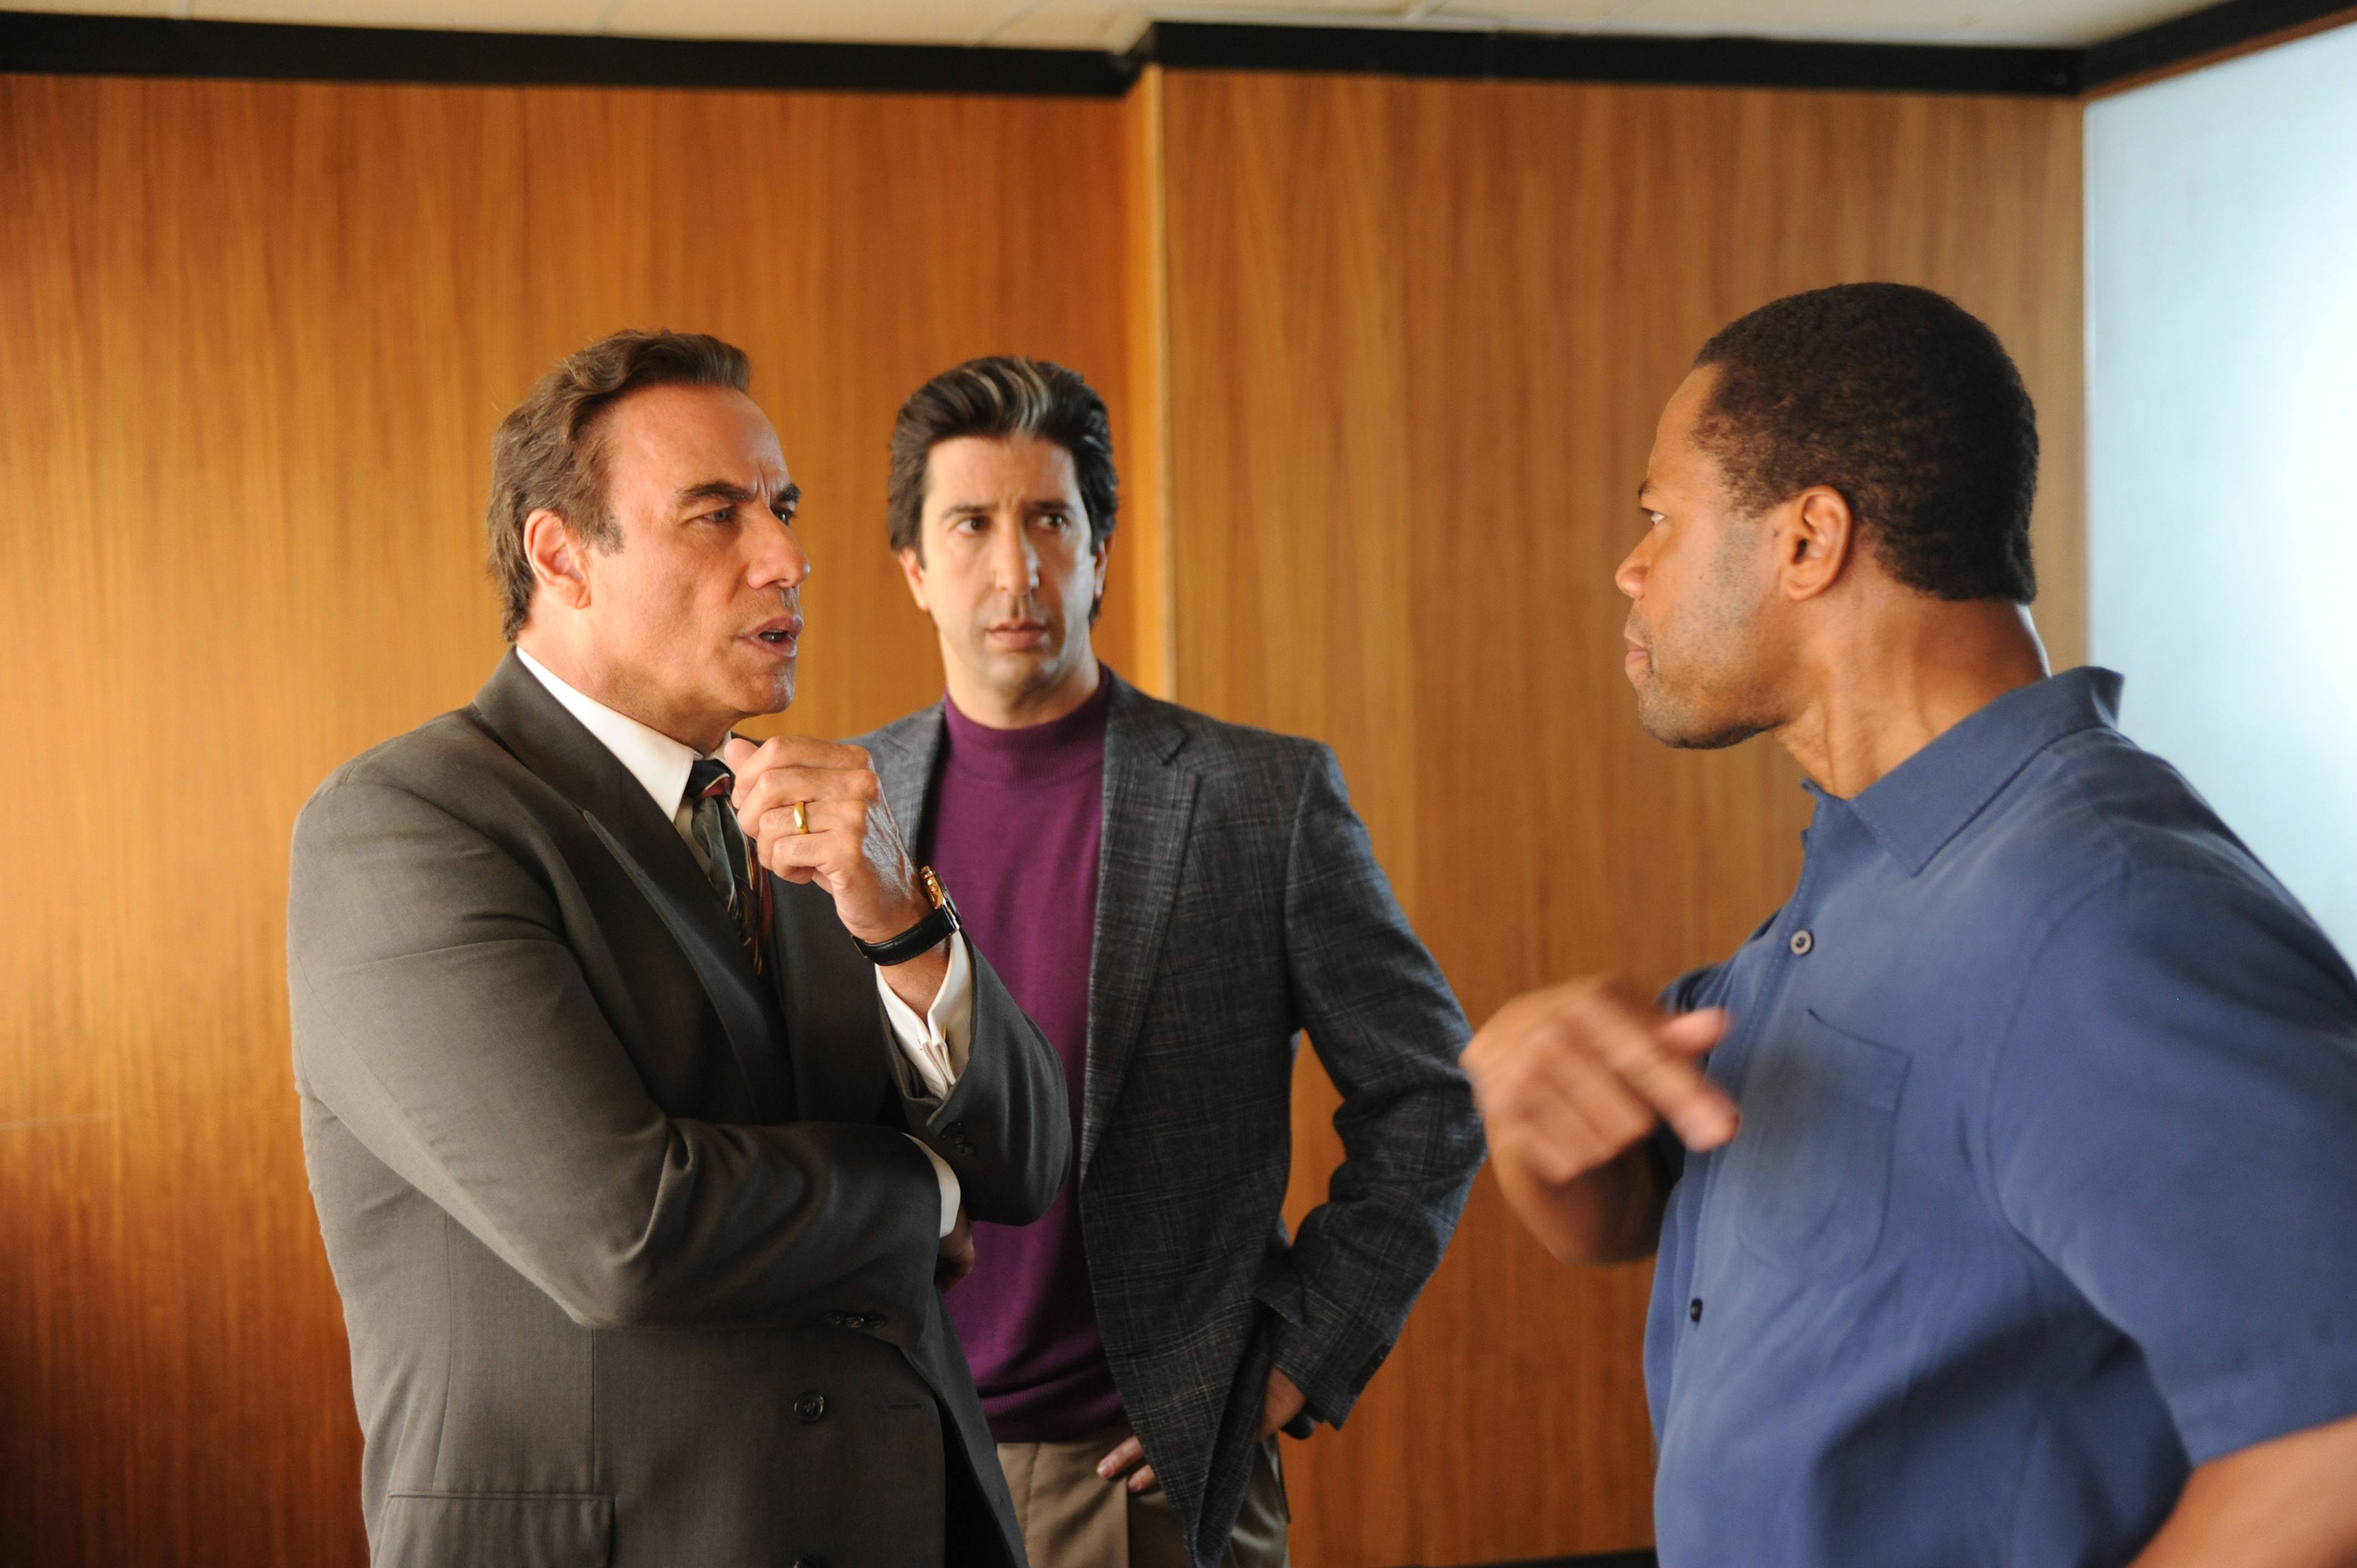 The People v. O.J. Simpson: American Crime Story Episodic Images 1